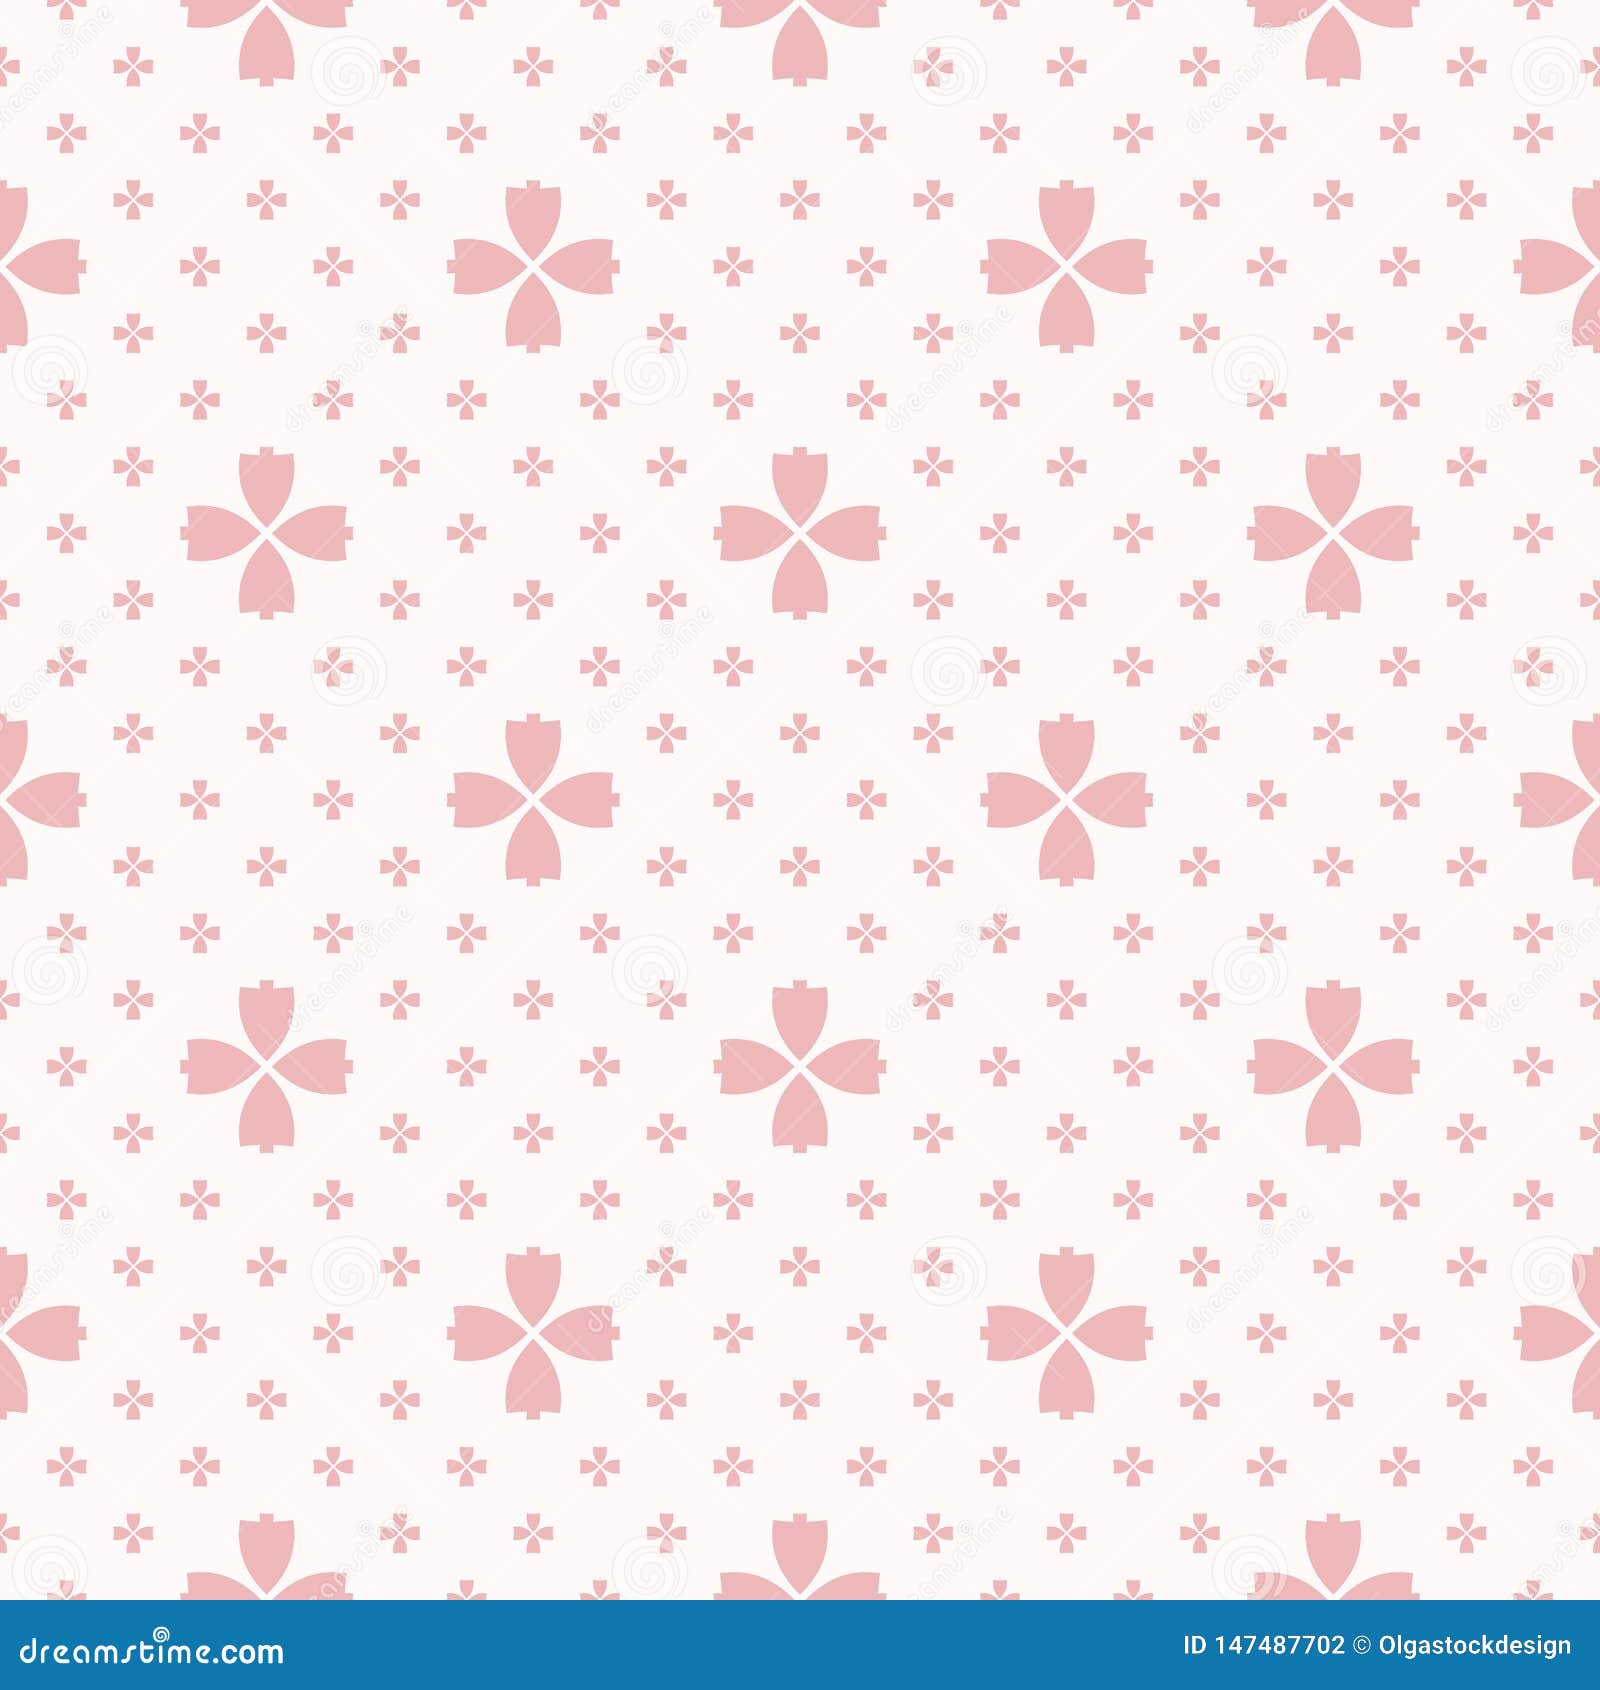 Simple Minimalist Floral Texture. Pink and White Geometric Seamless ...